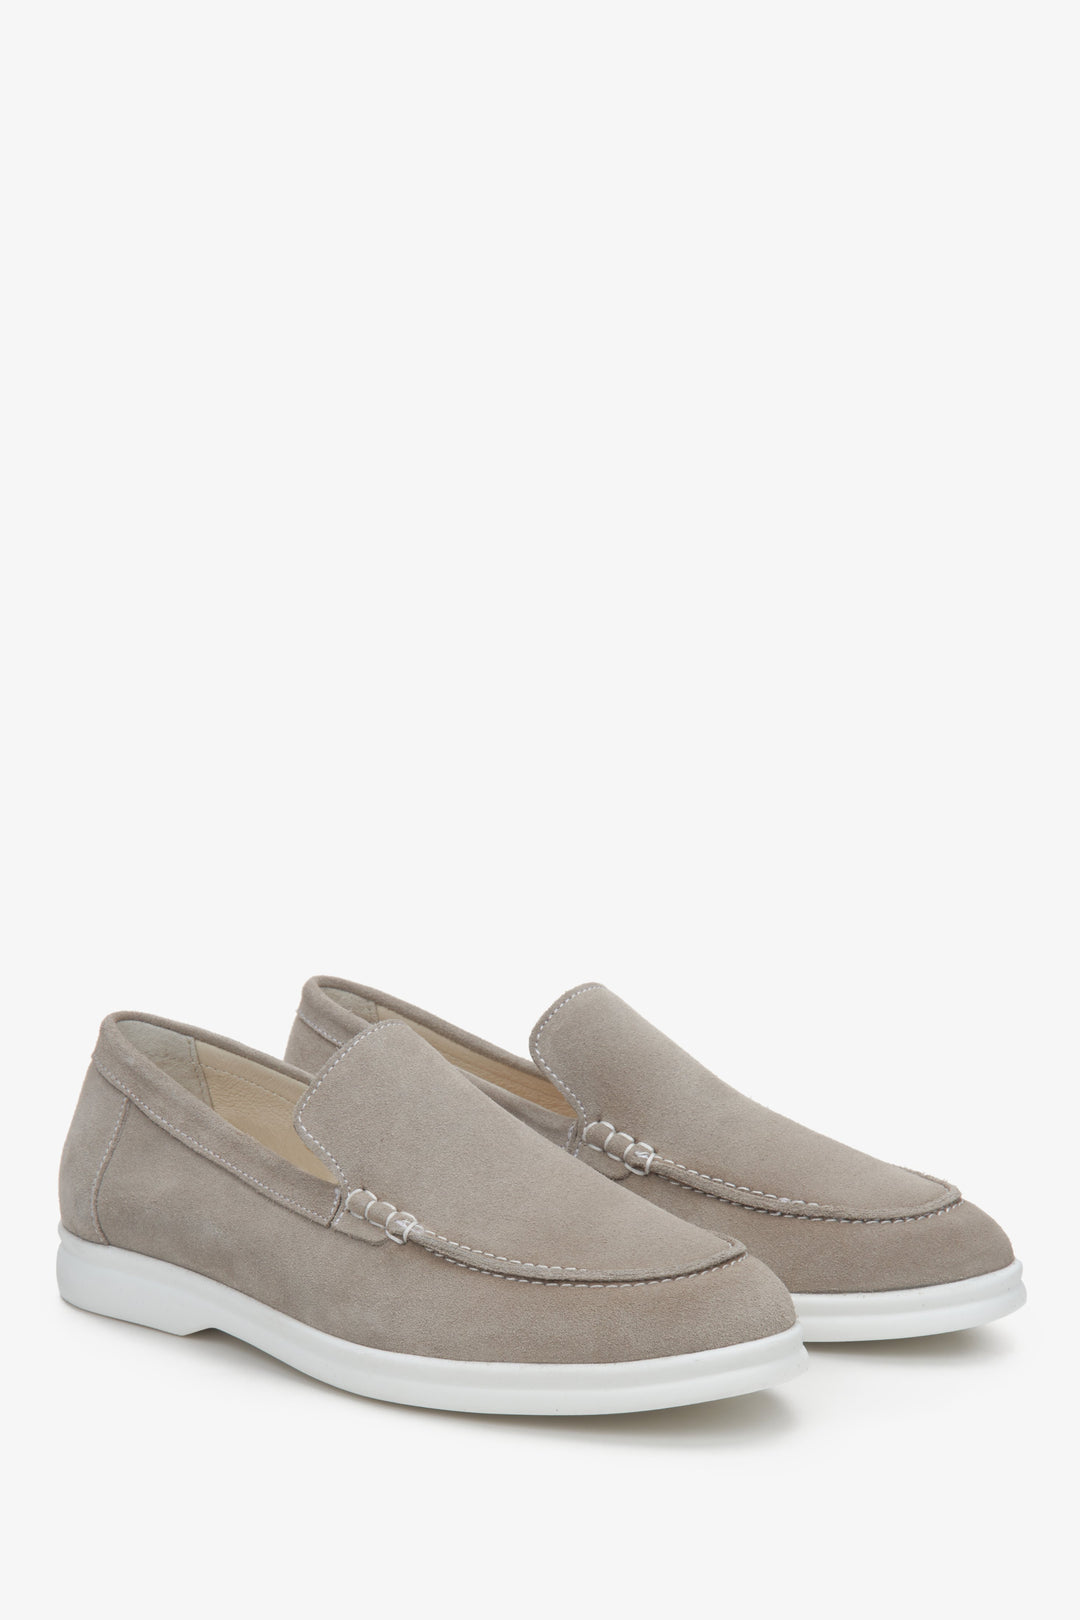 Women's suede loafers in dark grey by Estro - presentation of the sideline and white sole.